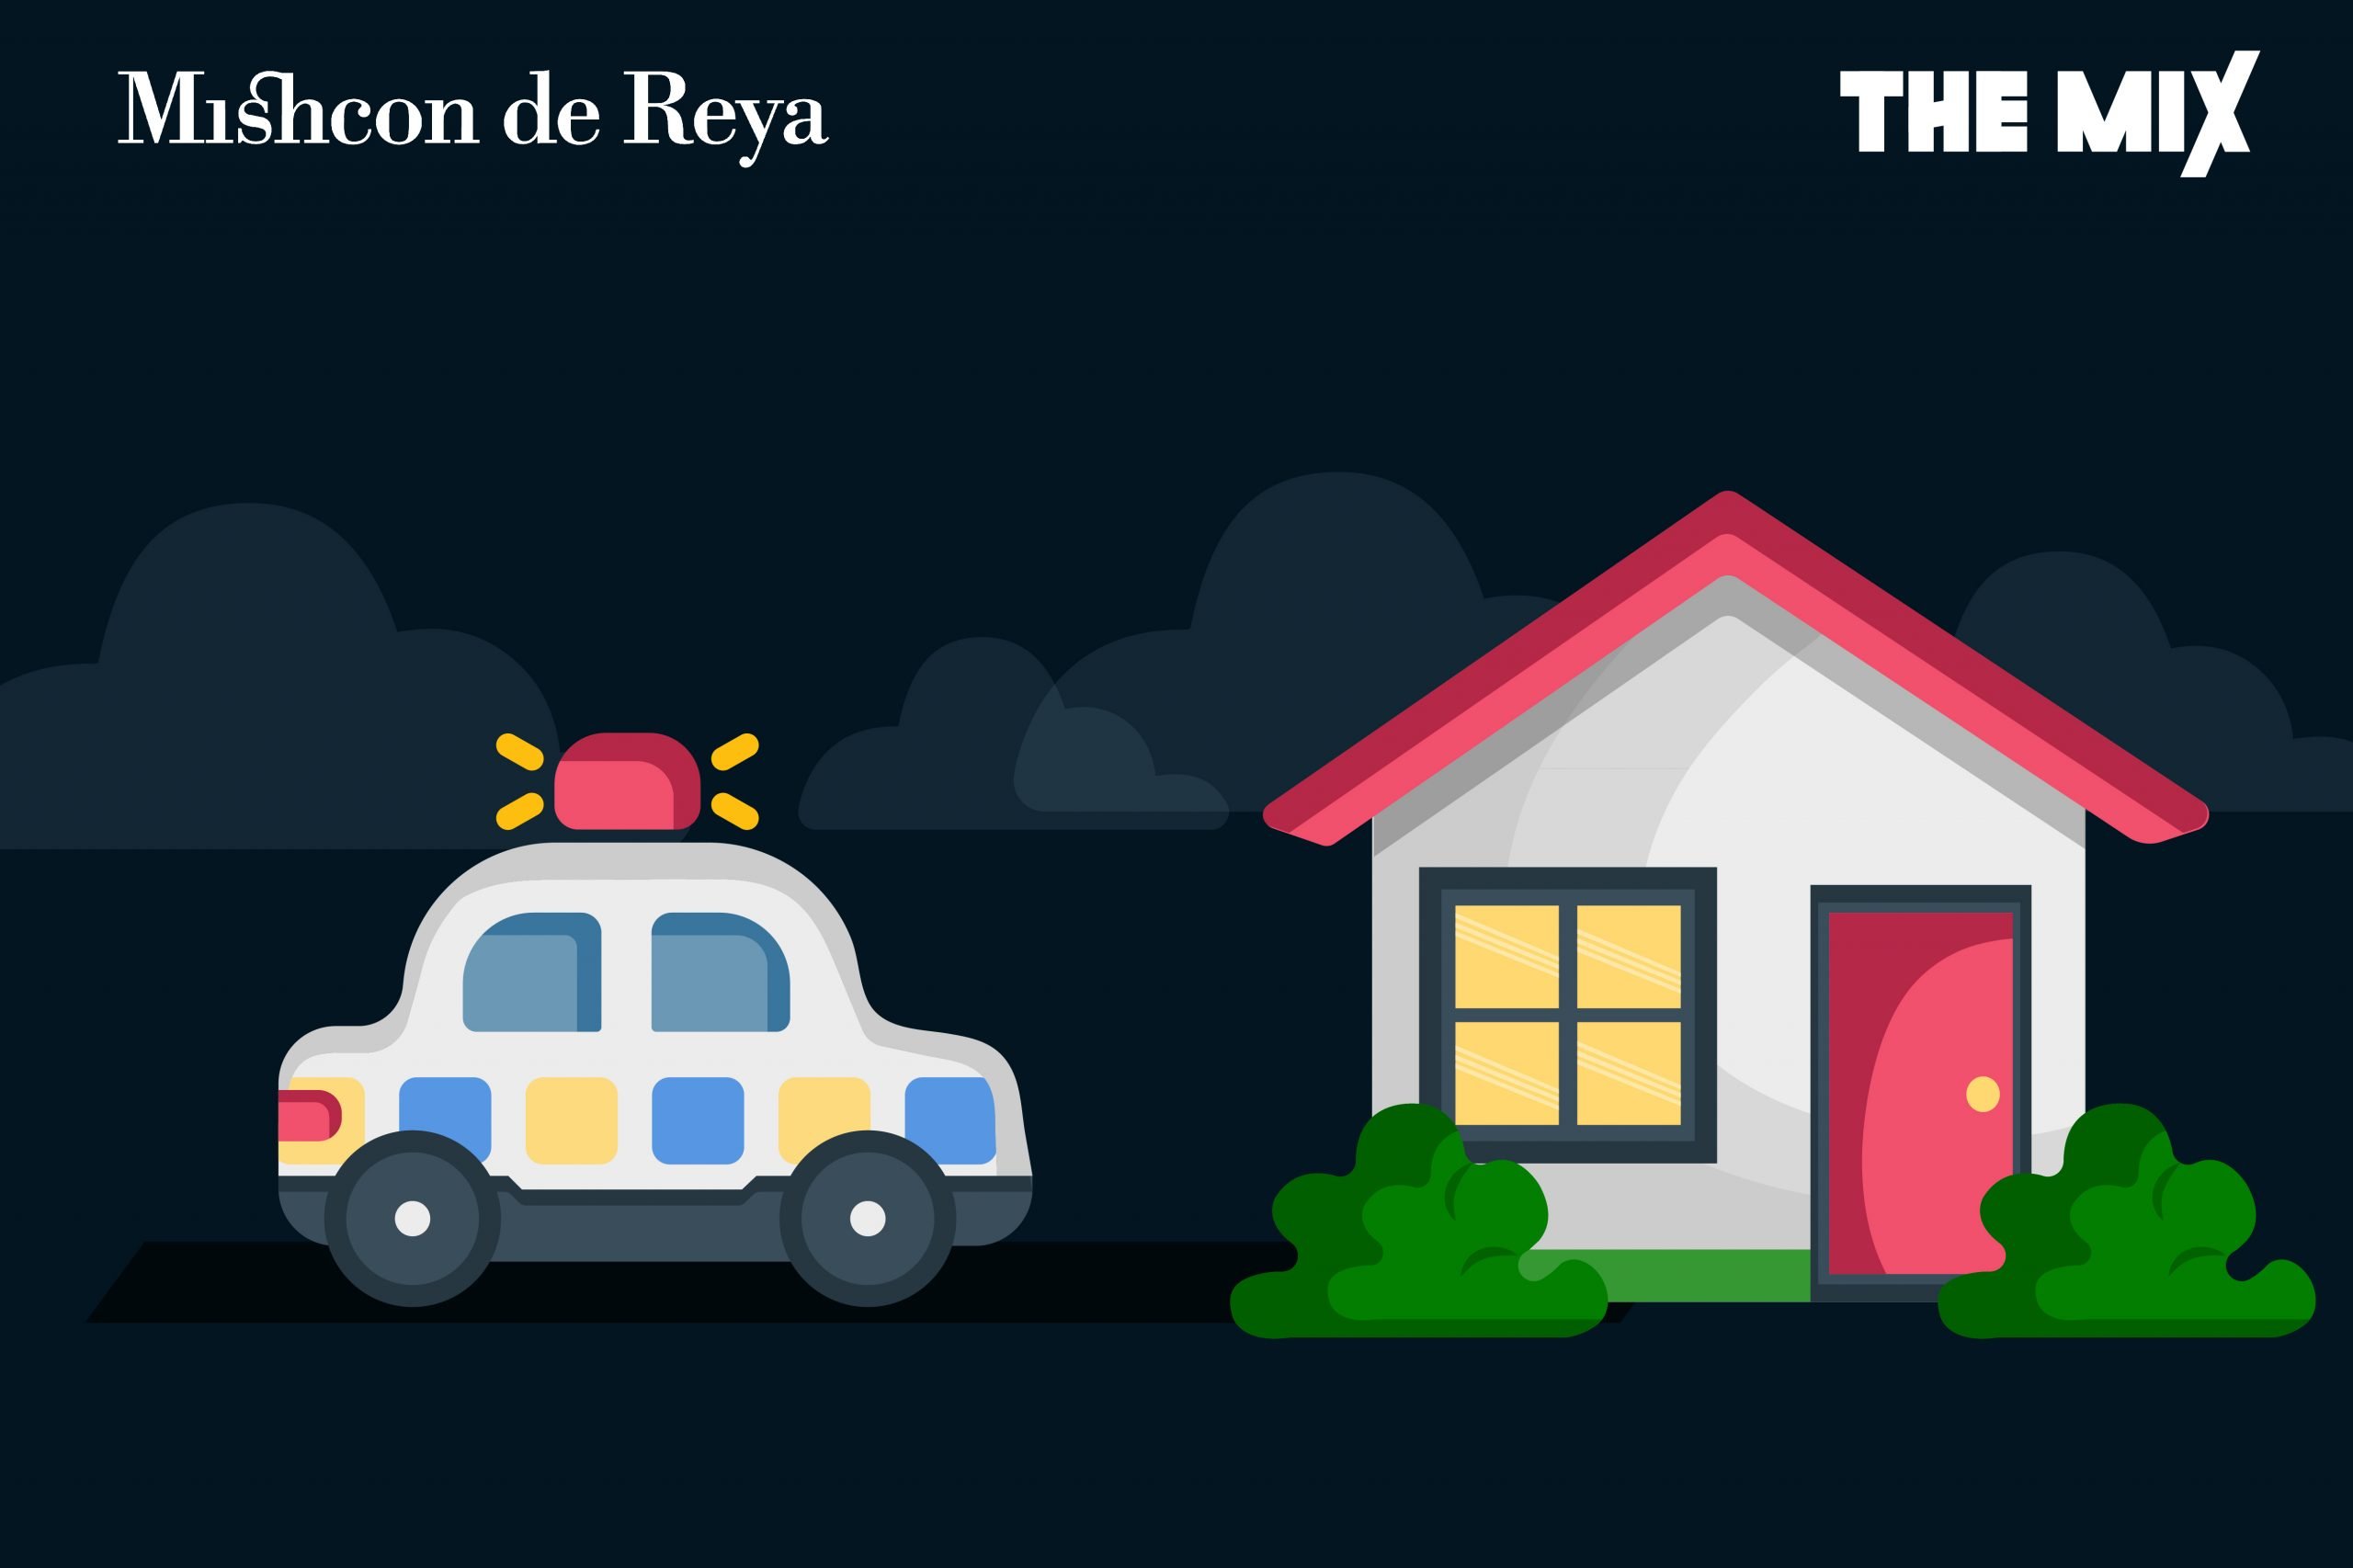 Graphic shows a police car arriving at a house at night time, representing a police welfare check